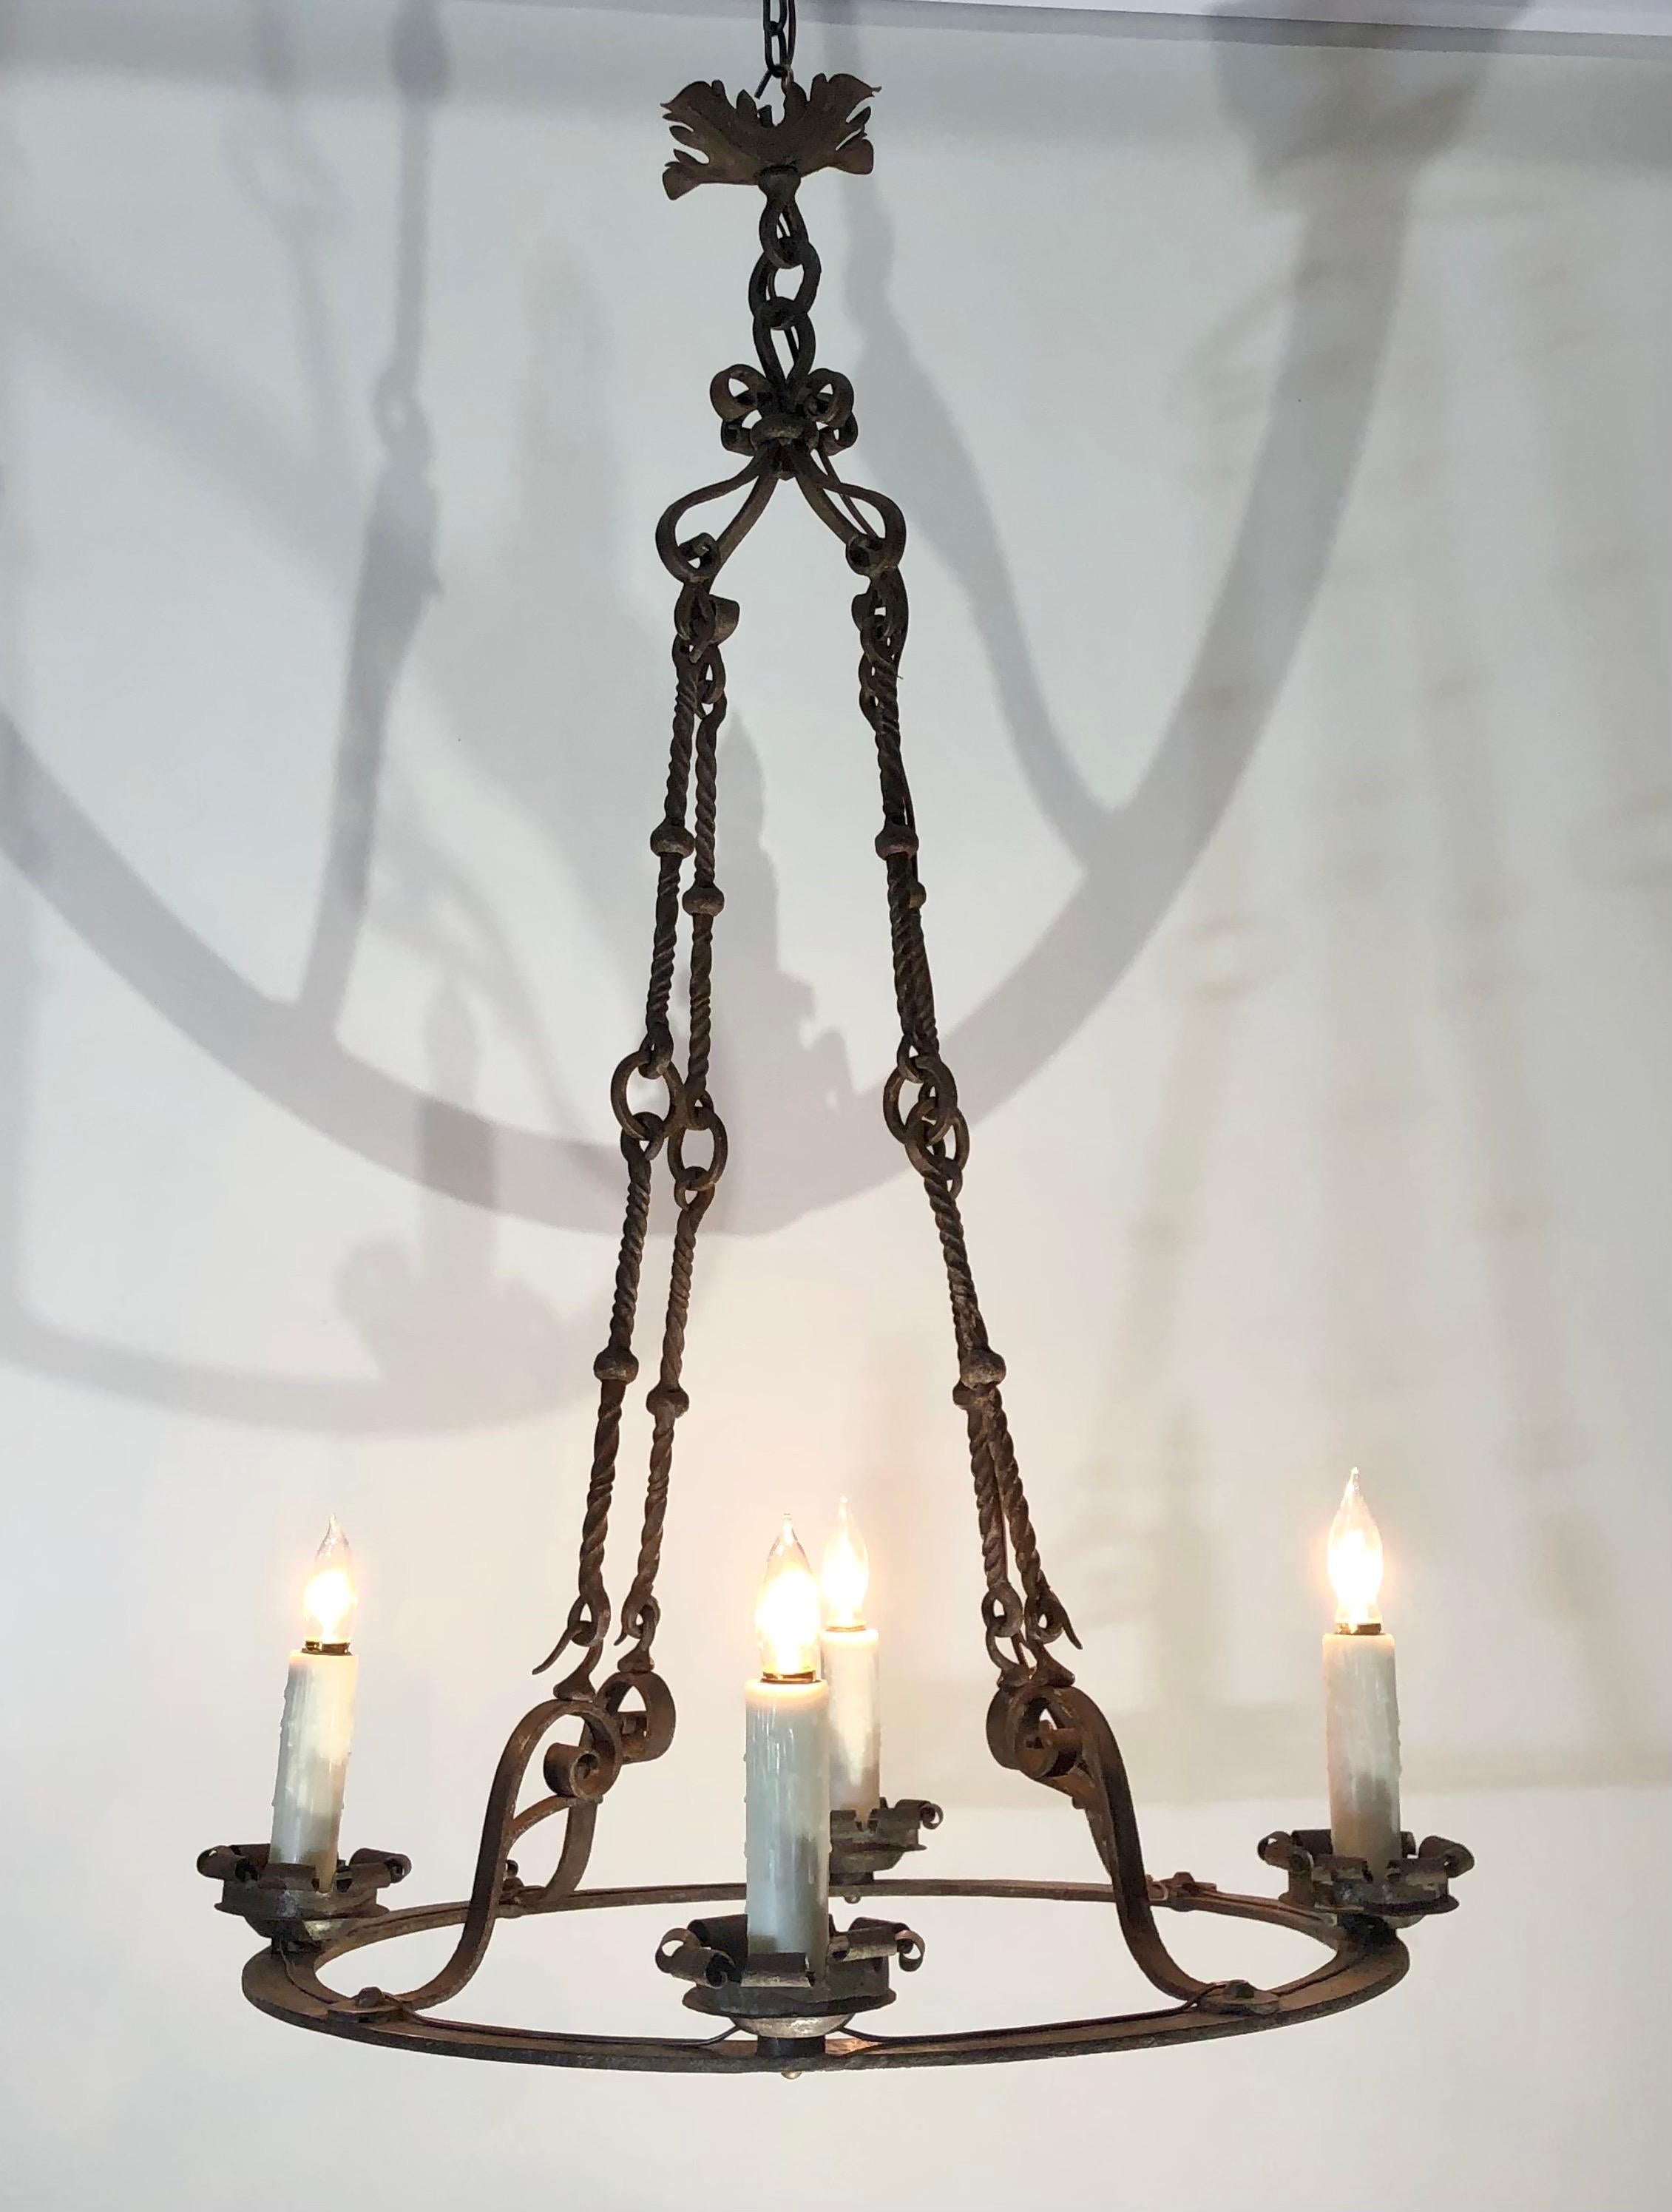 This French Four Light Circular Hand-Wrought Iron Chandelier was original candle and made in the 19th Century.  The  Circular Hand-Wrought Iron Ring has four Wrought Iron Bobeches and was originally candle.   The Circular Hand-Wrought Iron Ring has